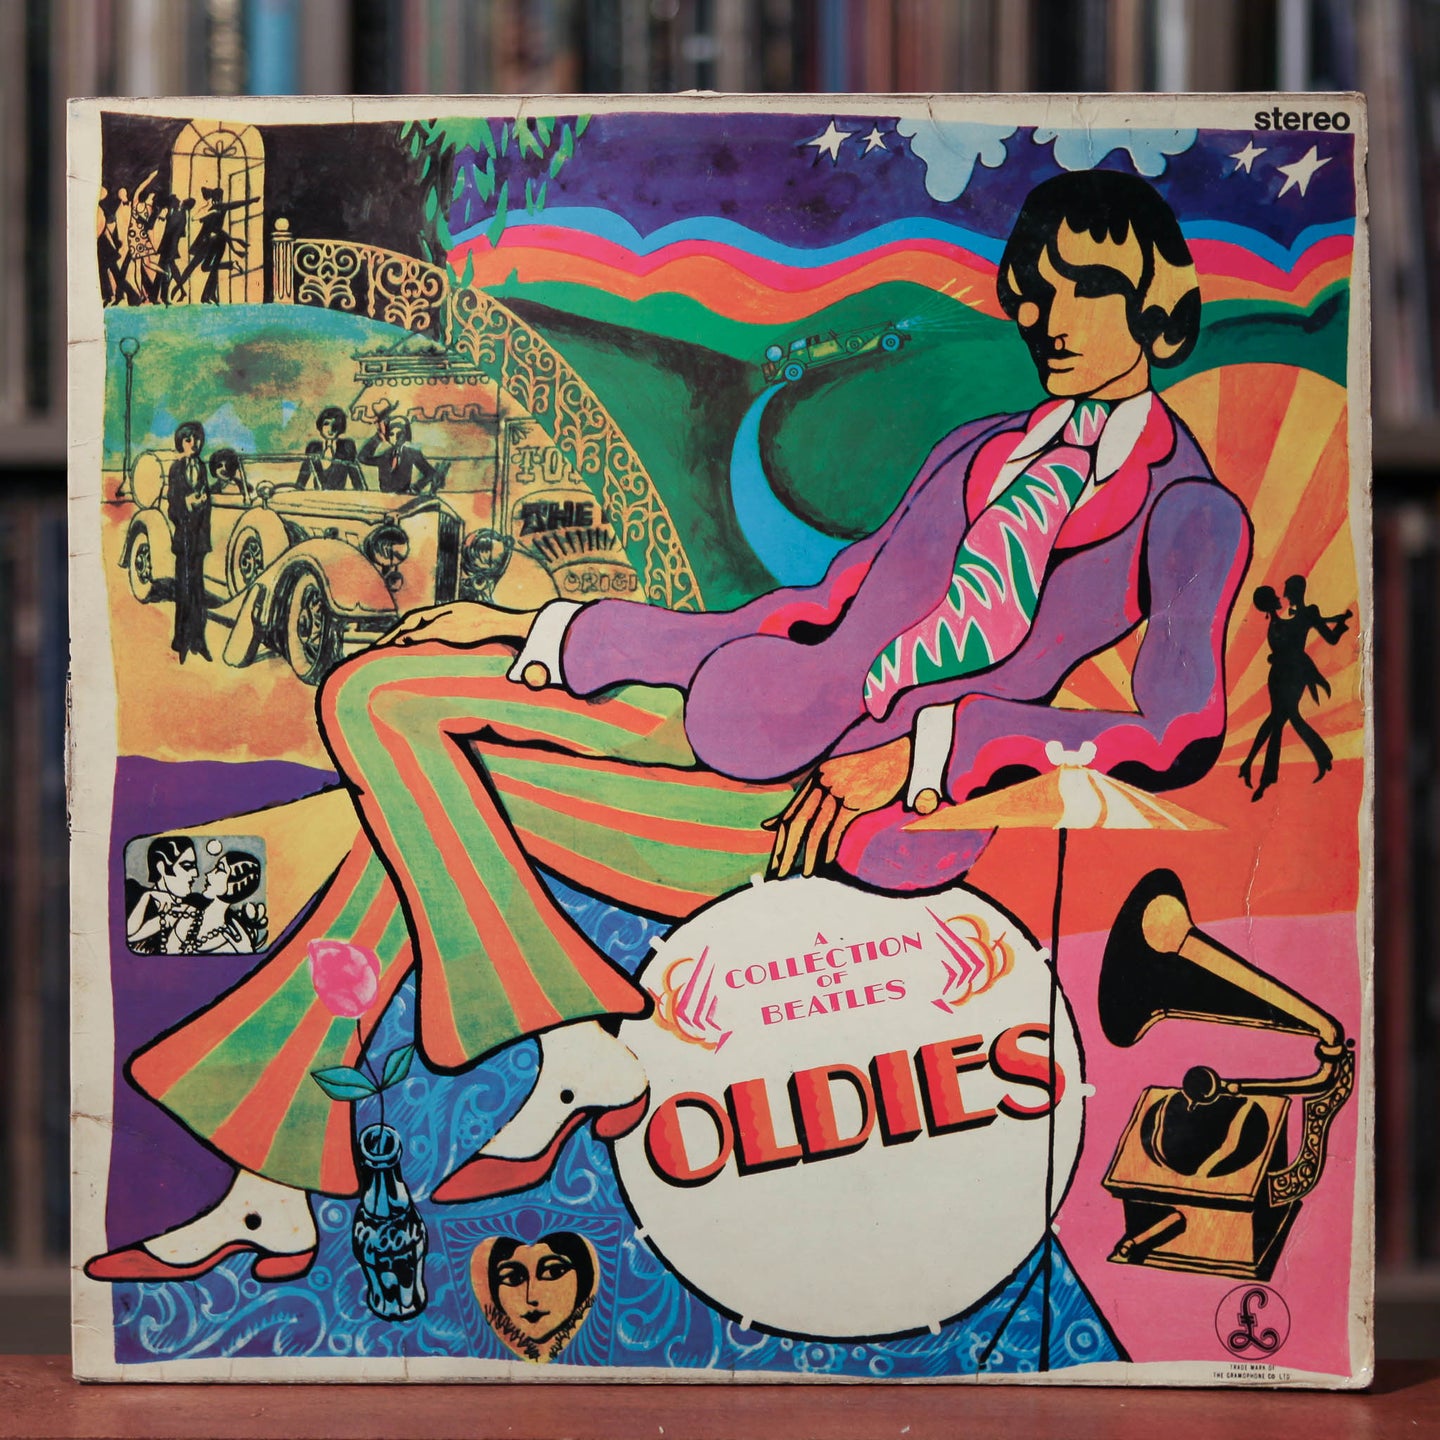 The Beatles - A Collection Of Beatles Oldies - UK Import - 1971 Parlophone, VG/VG